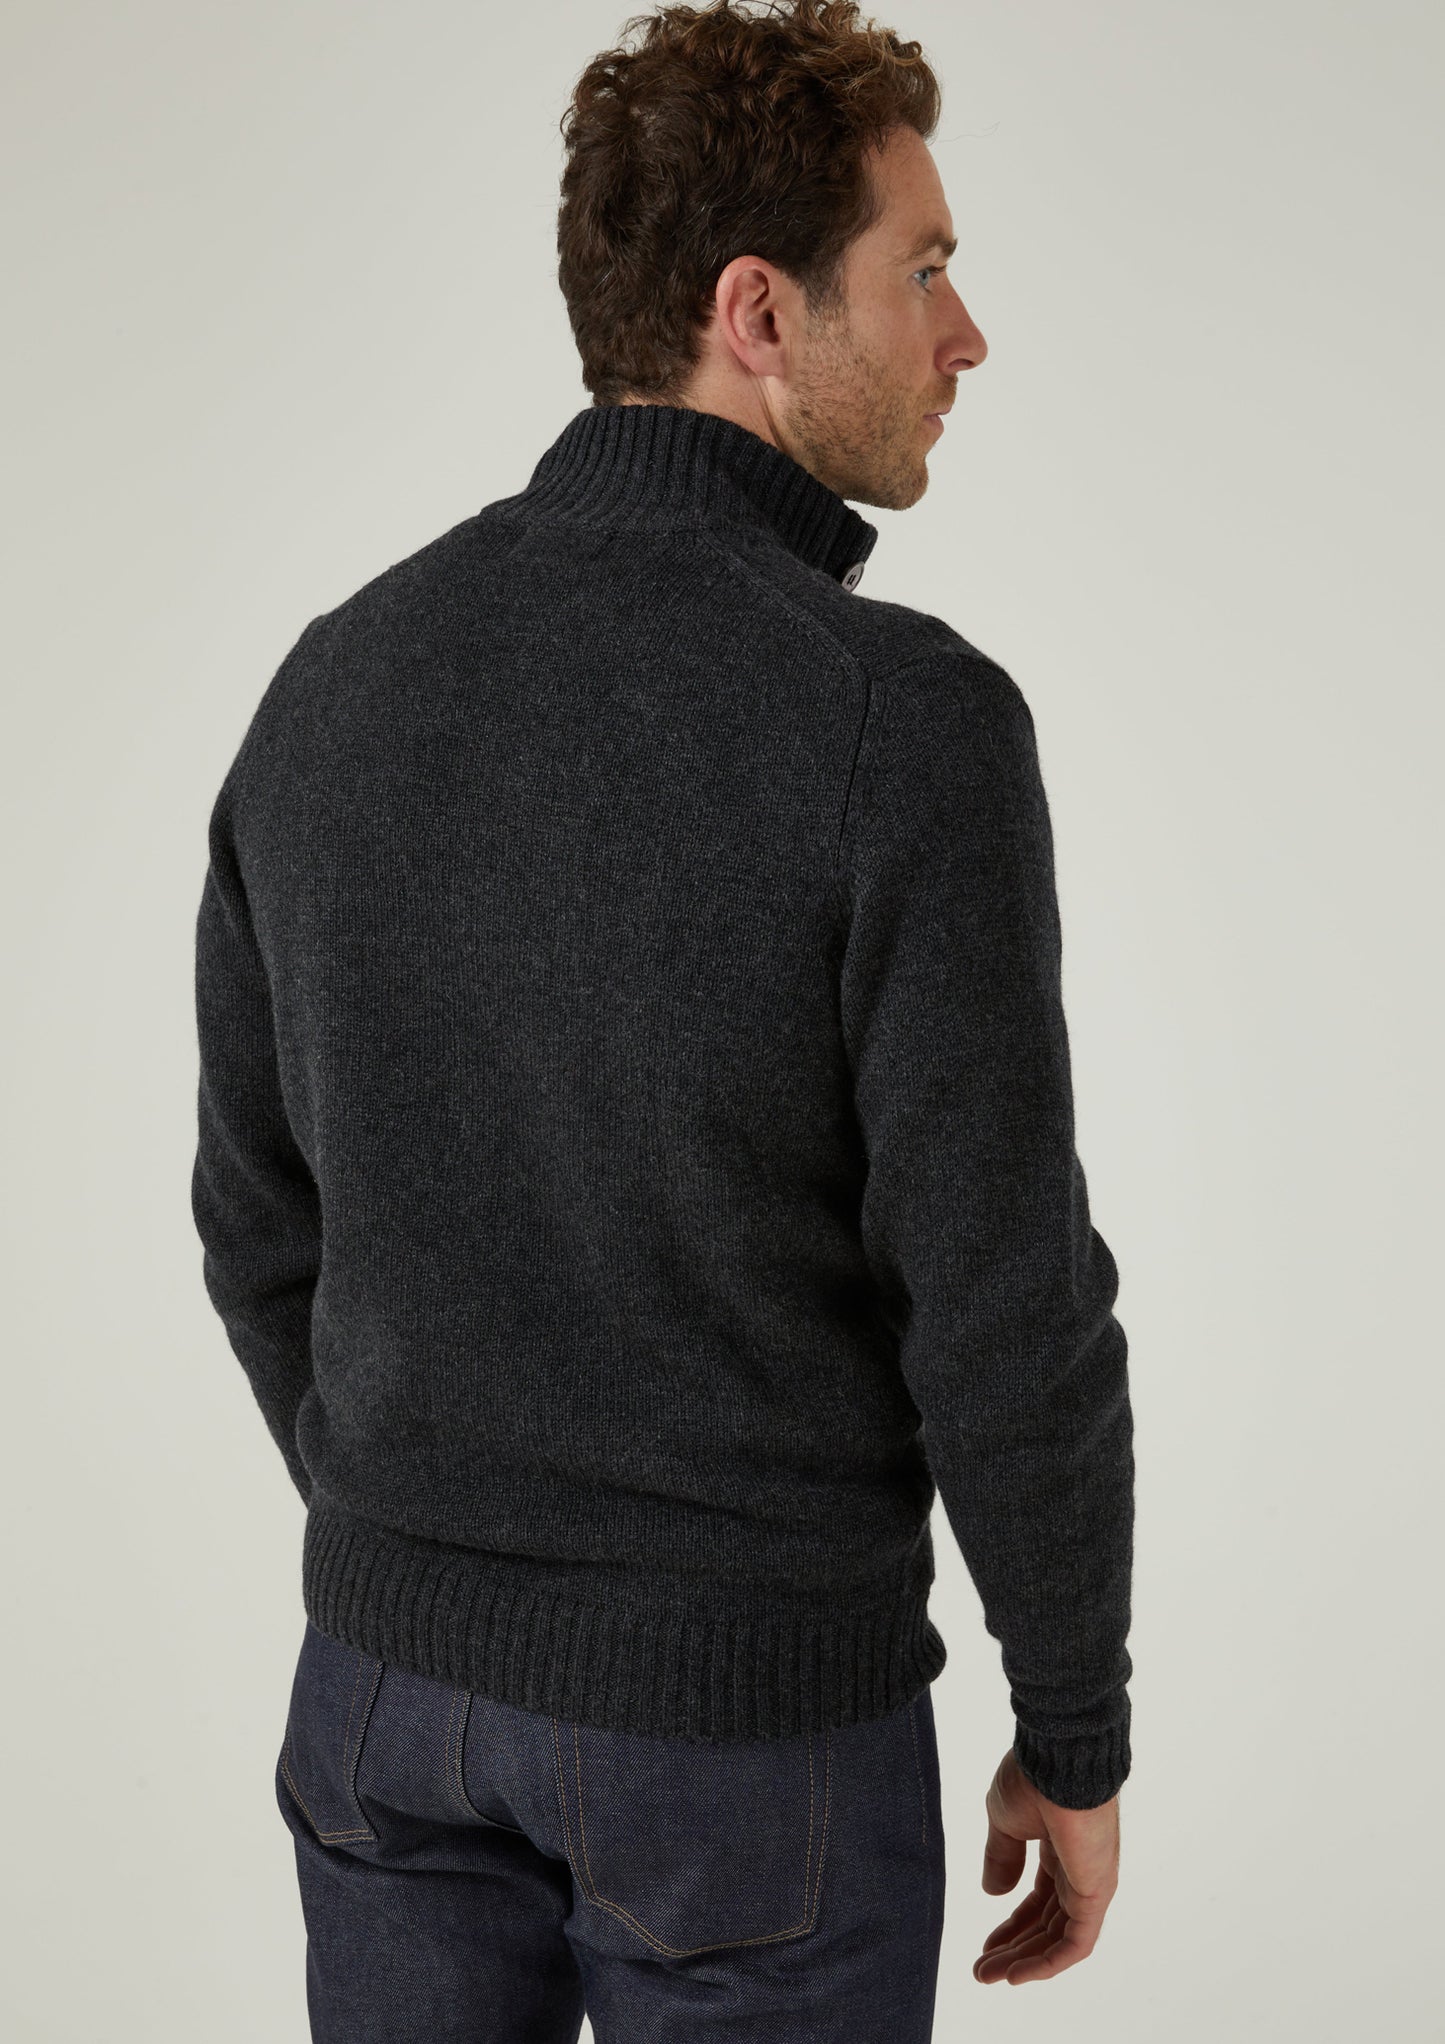 Landford Men's Lambswool Buttoned Jumper In Charcoal 